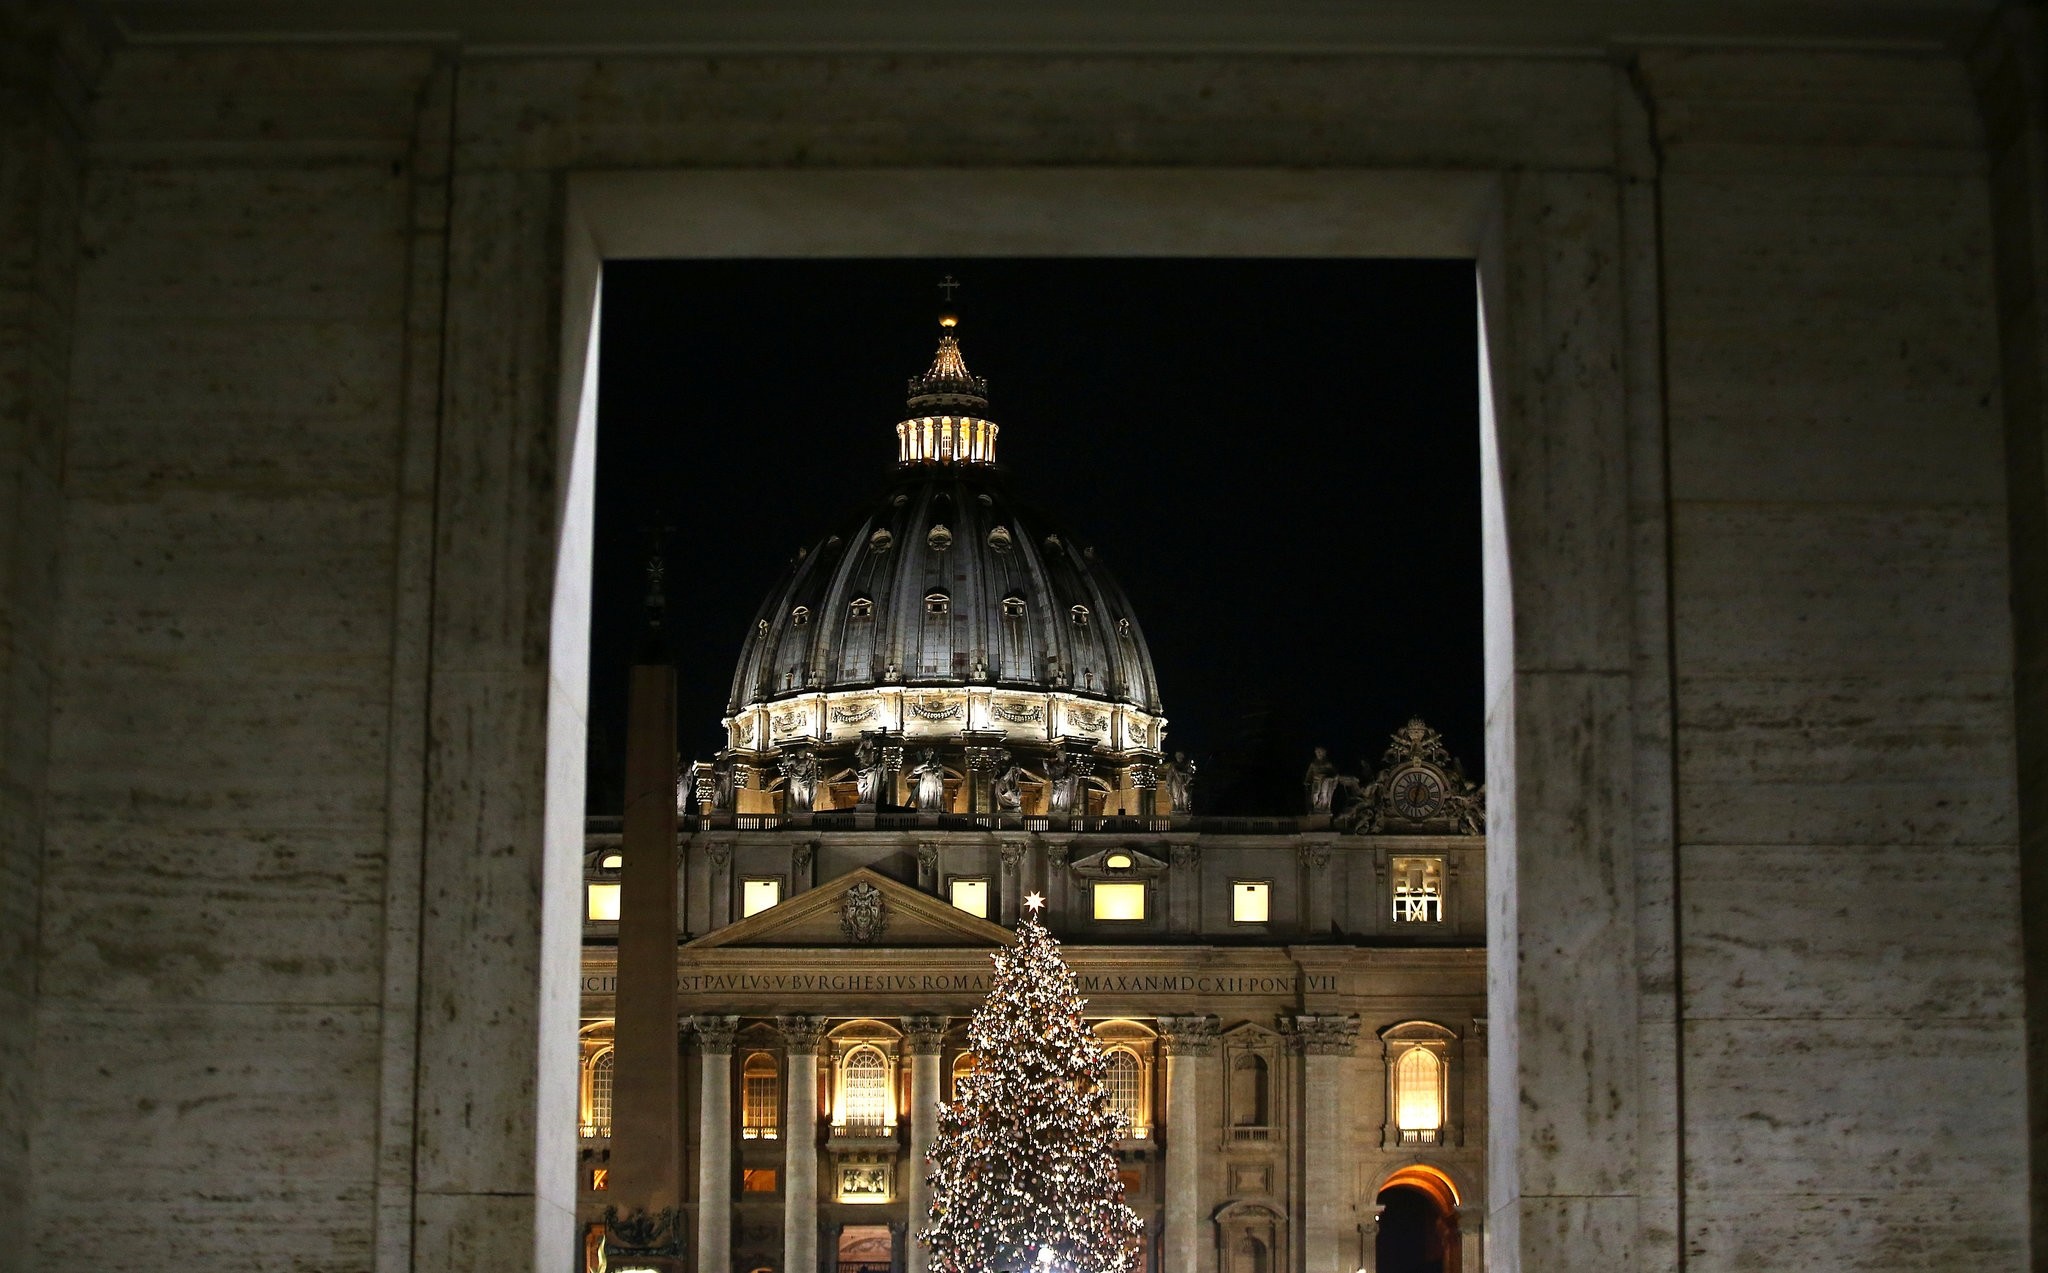 The Vatican Christmas tree is lit up after a ceremony in Saint Peter's Square at the Vatican, December 7, 2017. (REUTERS Photo)